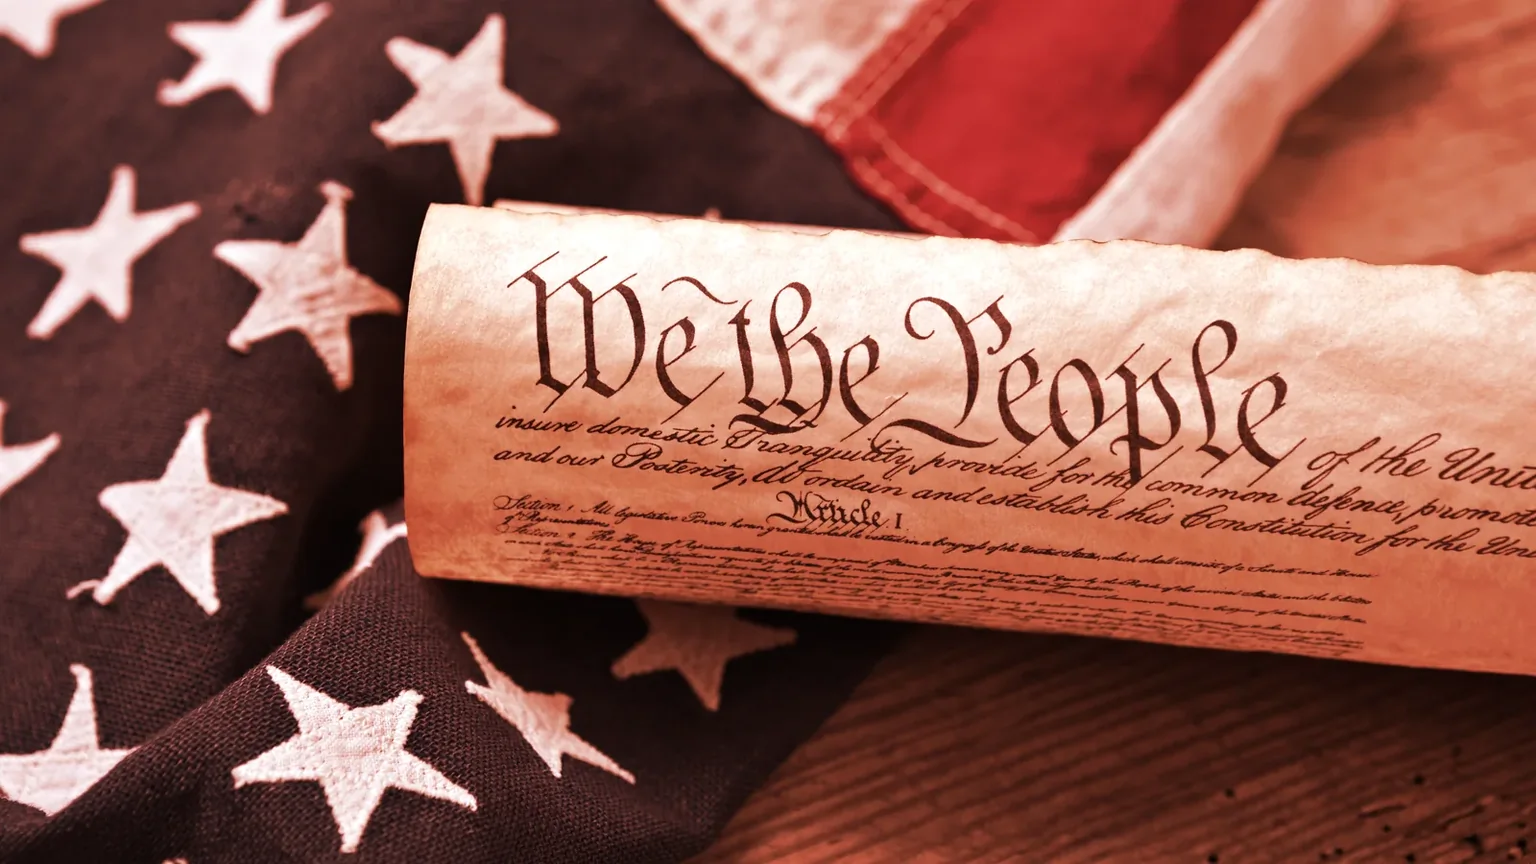 United States Constitution, rolled in a scroll on a vintage American flag and rustic wooden board. Image: Shutterstock